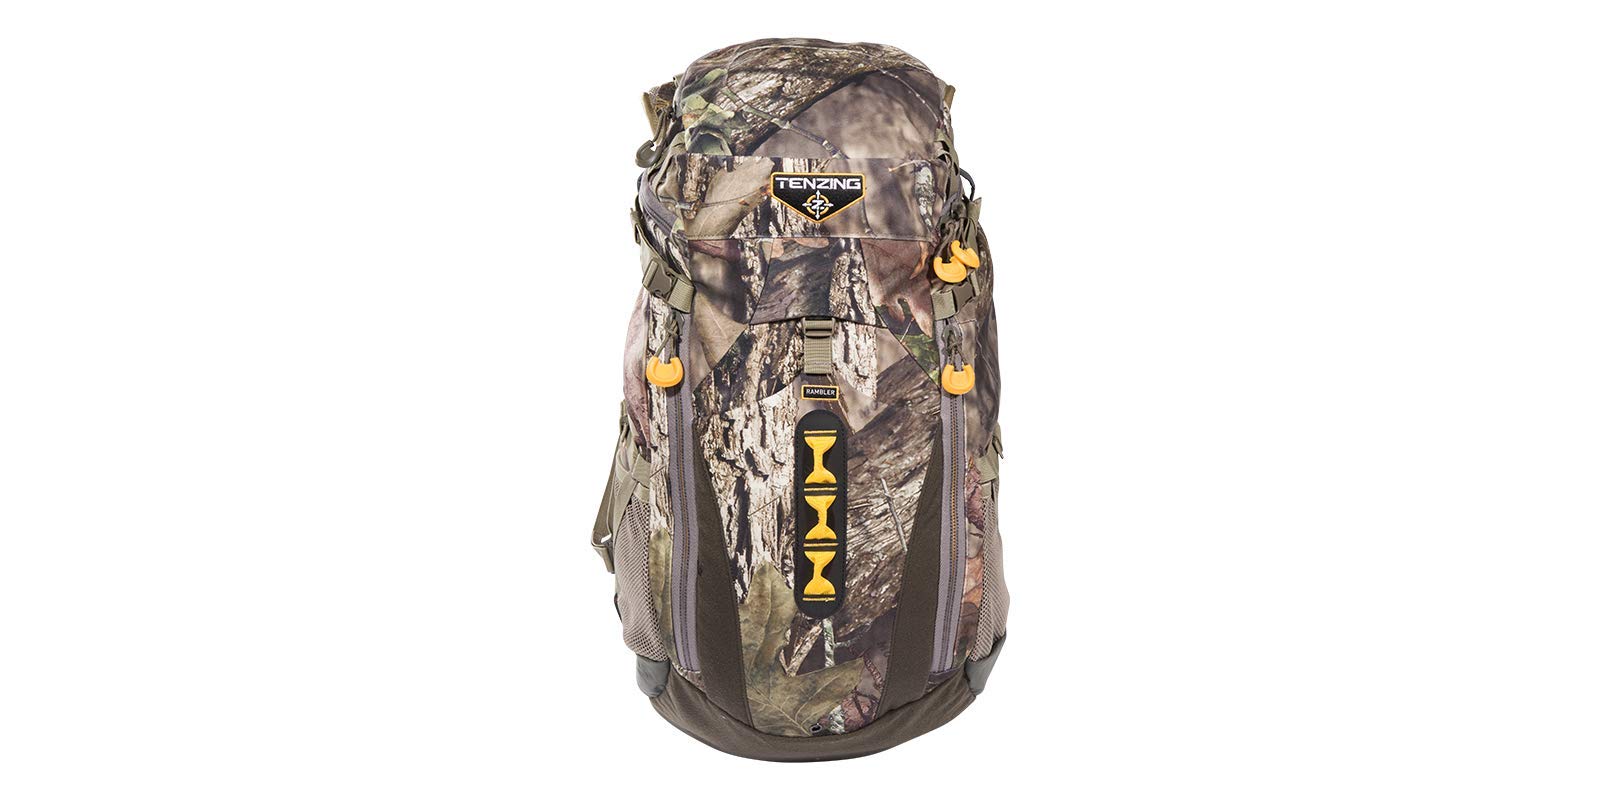 TENZING TX Series Hunting Packs| Premium Bow and Rifle Hunting Packs Featuring Mossy Oak Break-Up Country Camo | Available in Backpack and Waist Pack Styles